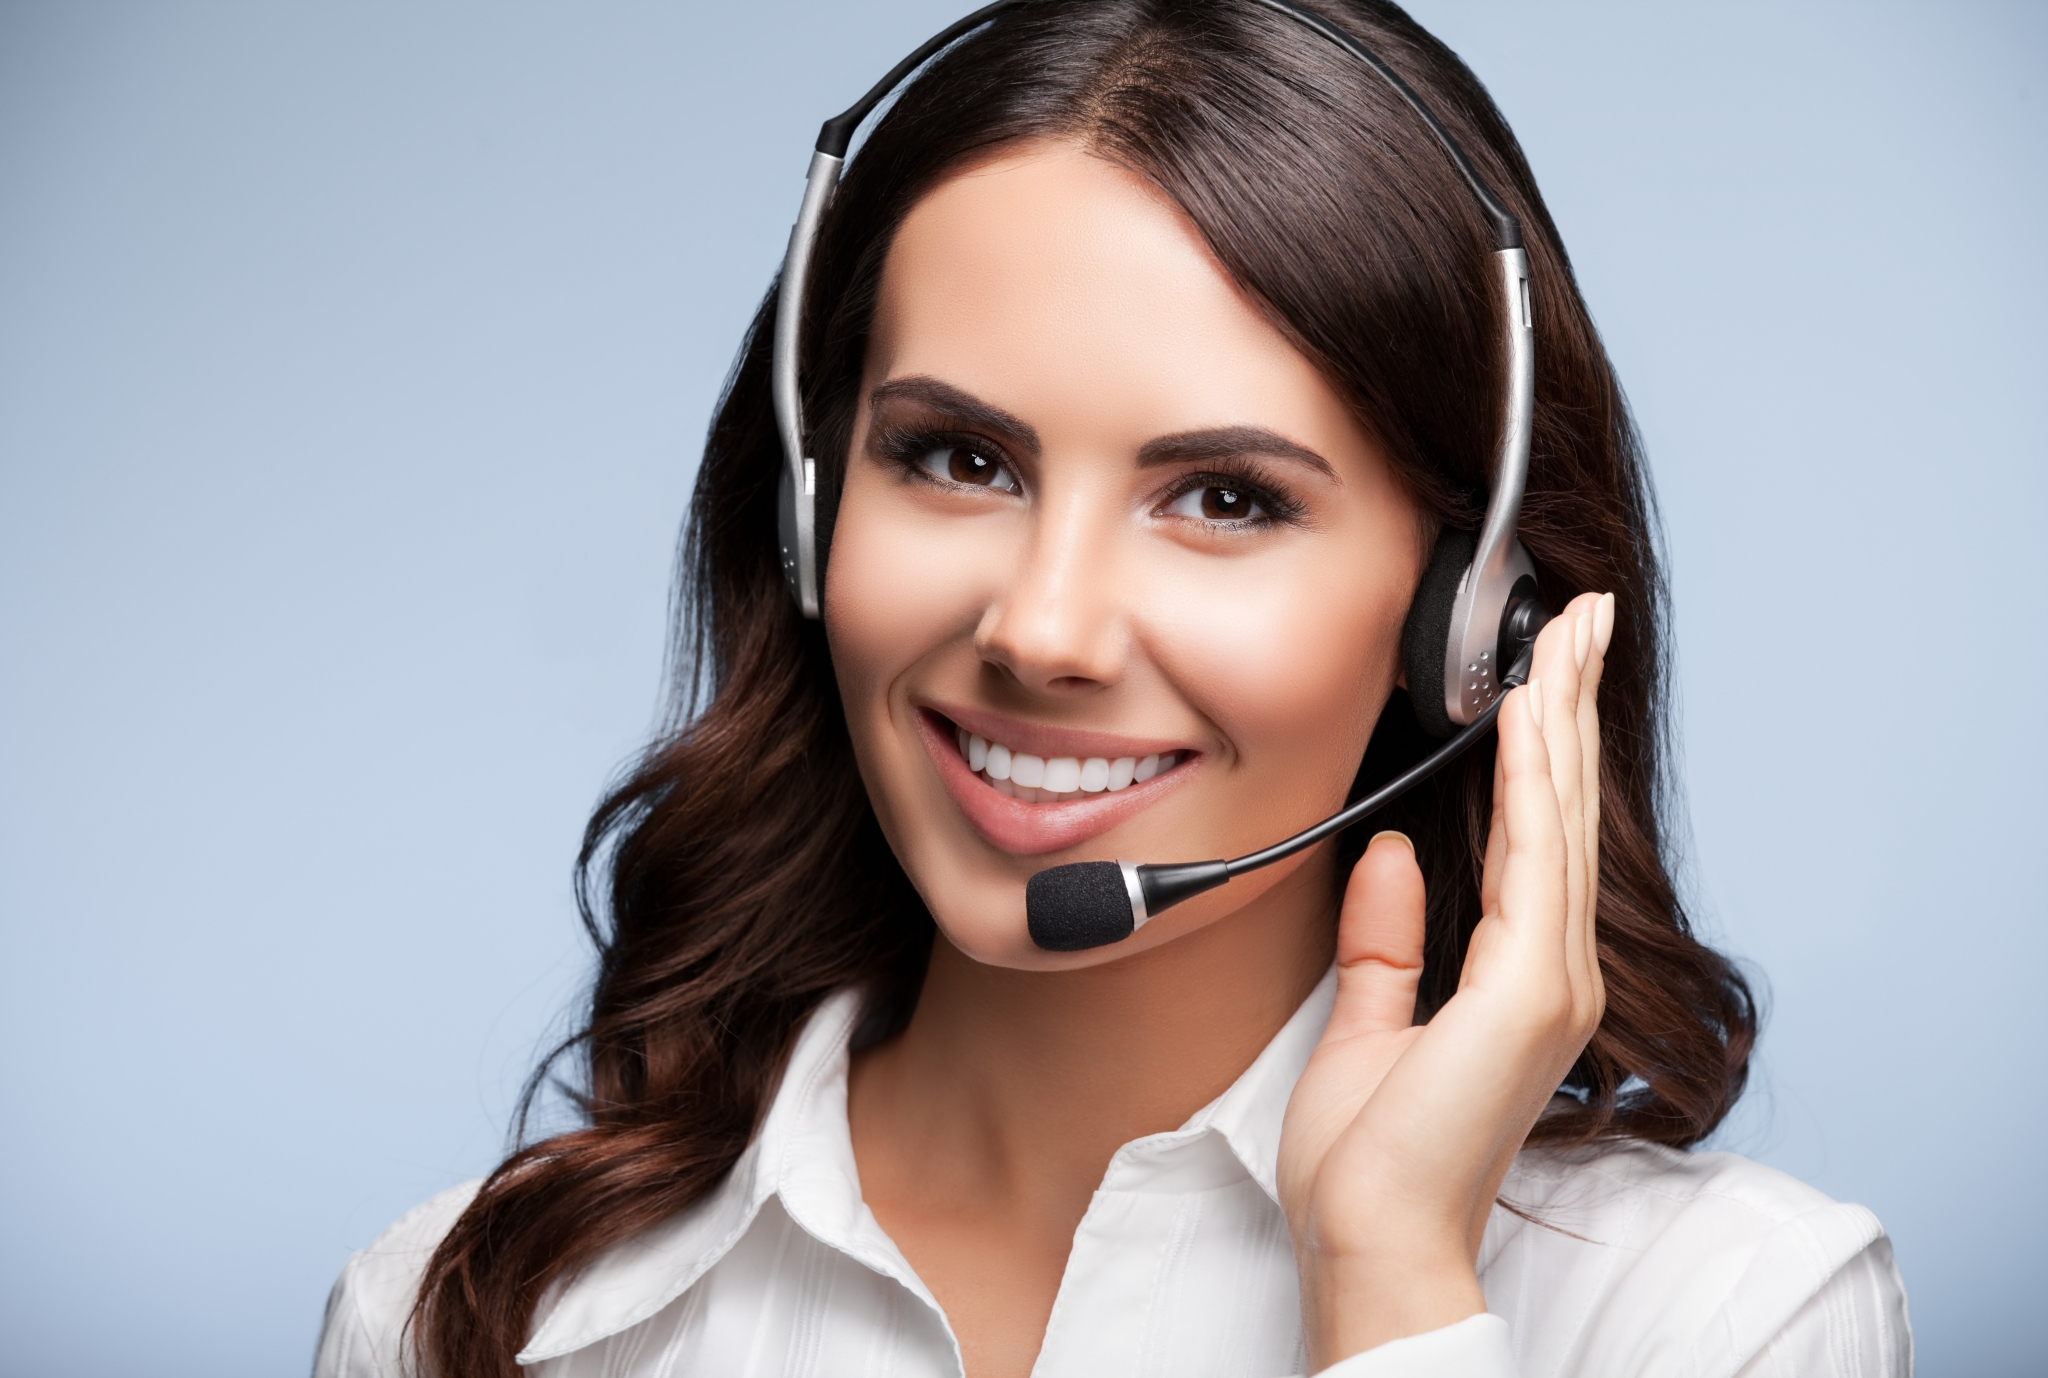 Portrait of happy smiling customer support female phone operator in headset, against grey background. Consulting and assistance service call center.